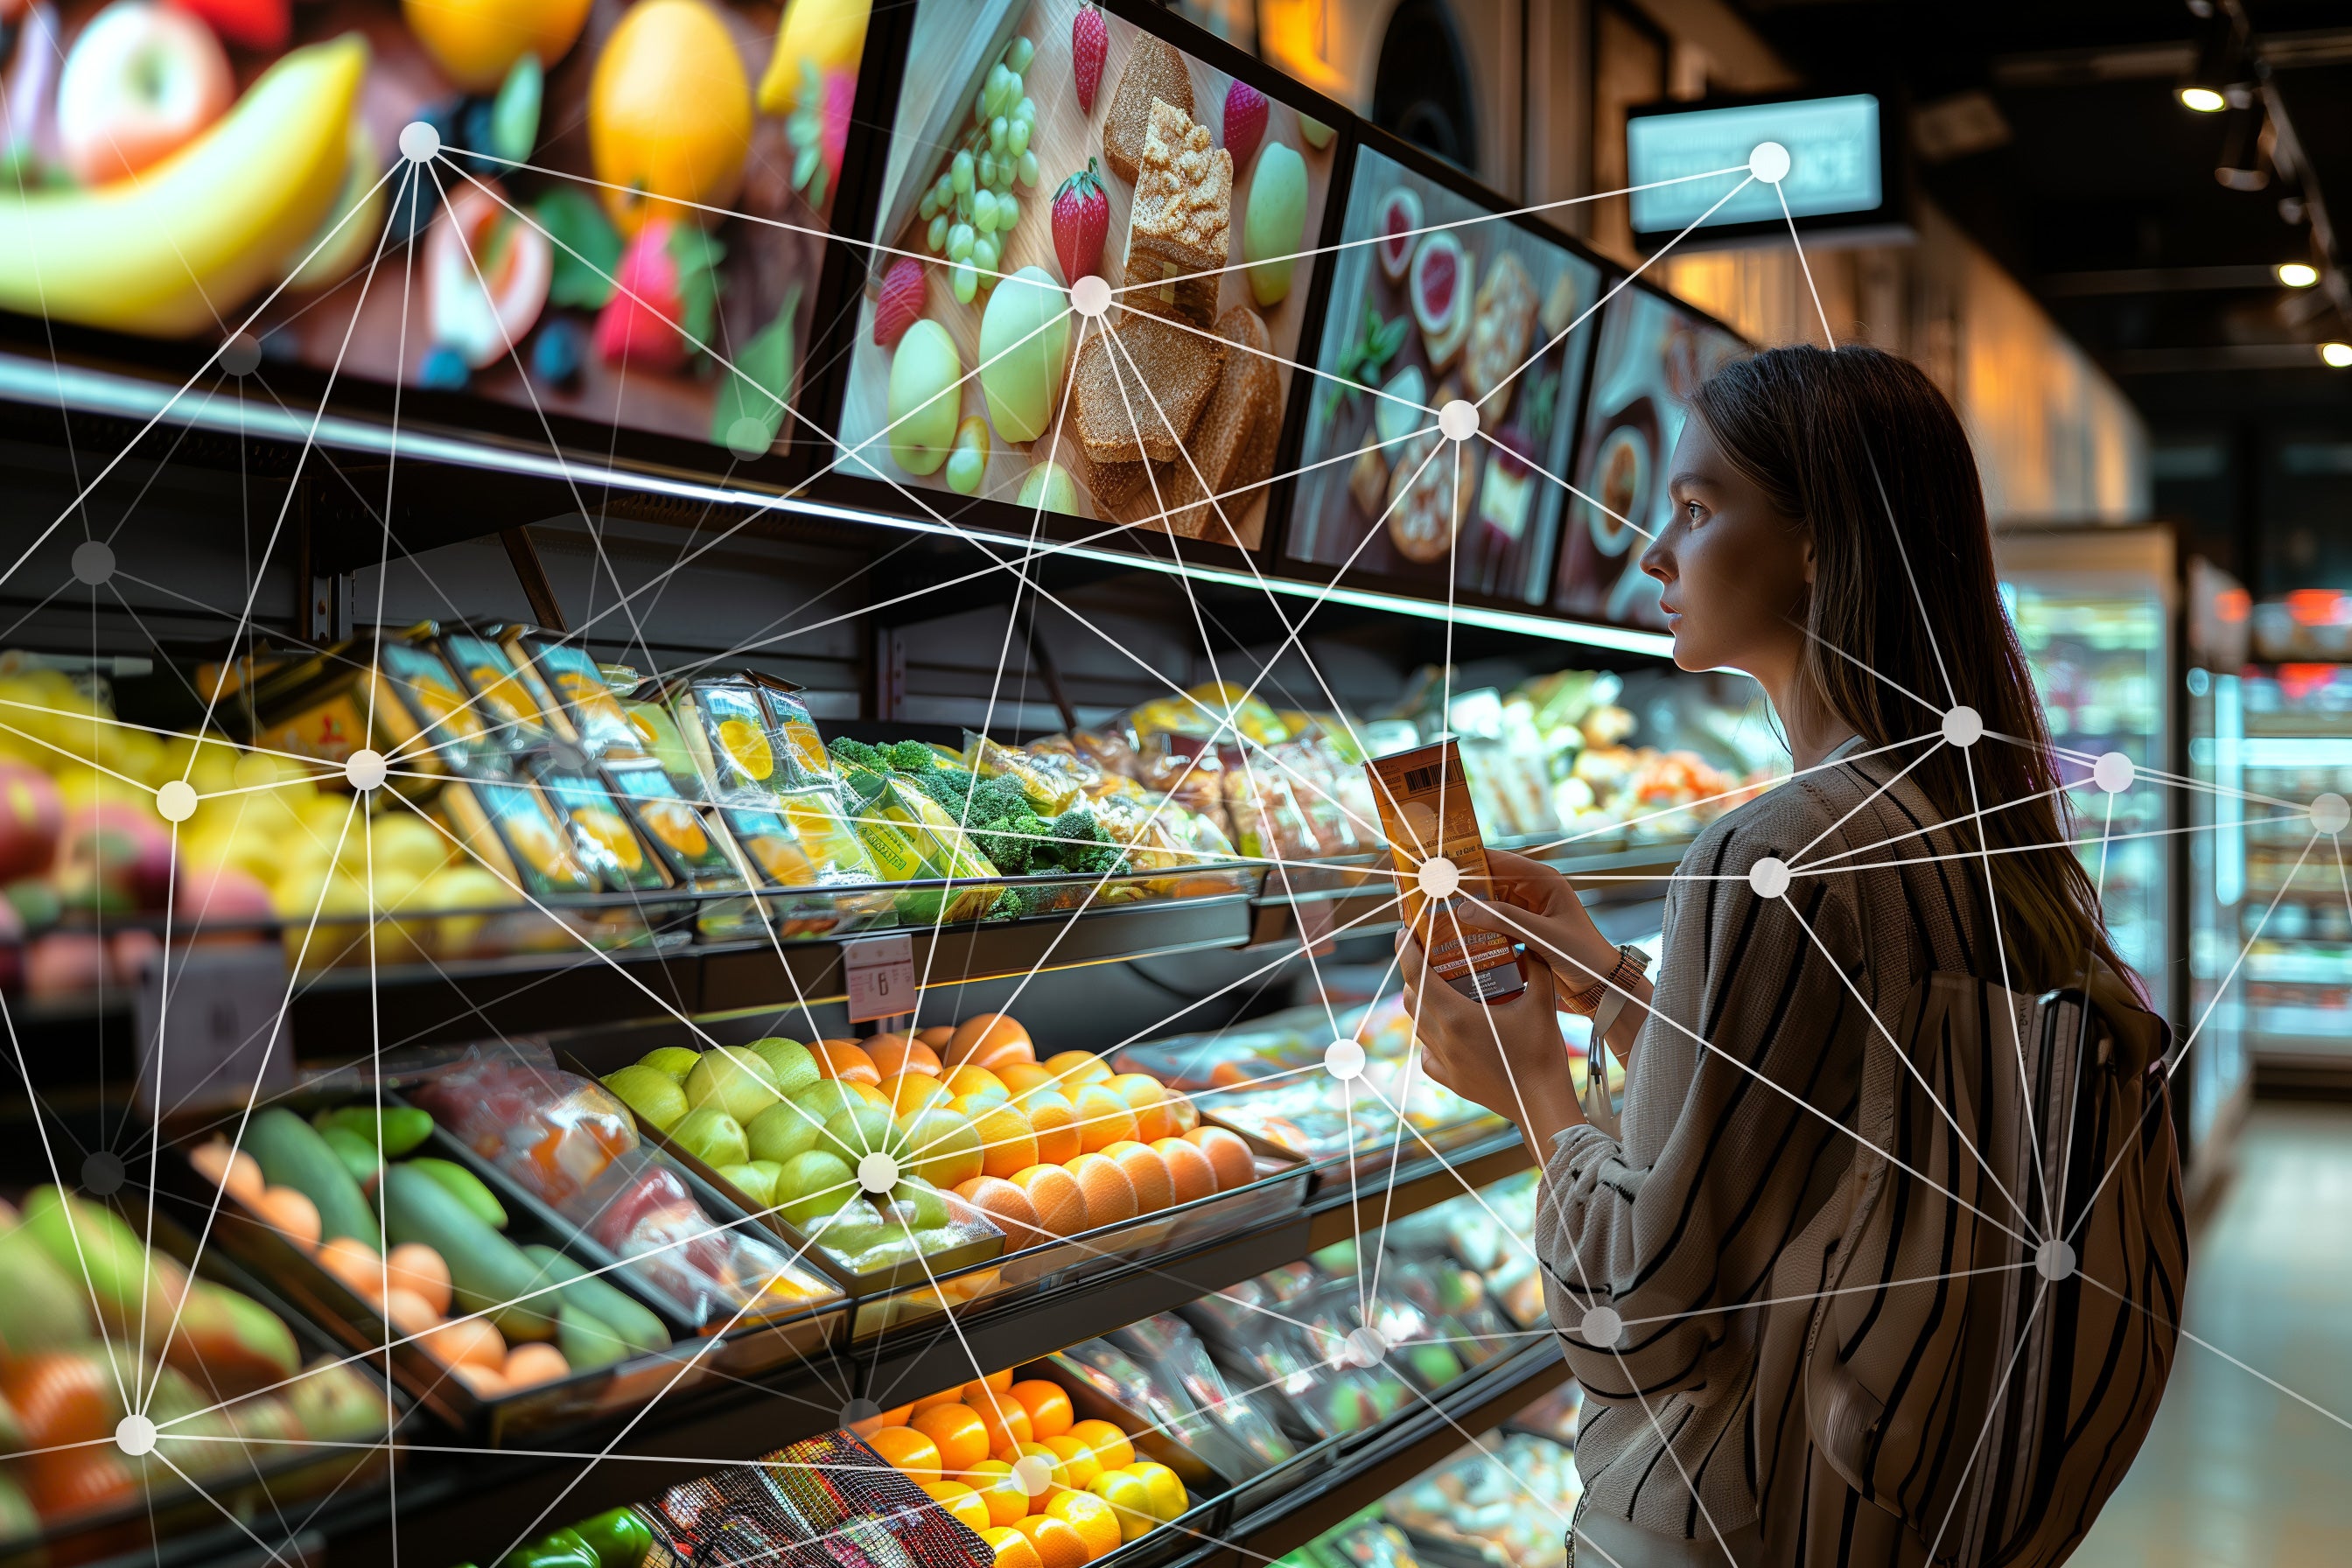 Using real-time audience data in stores will deliver a huge competitive advantage